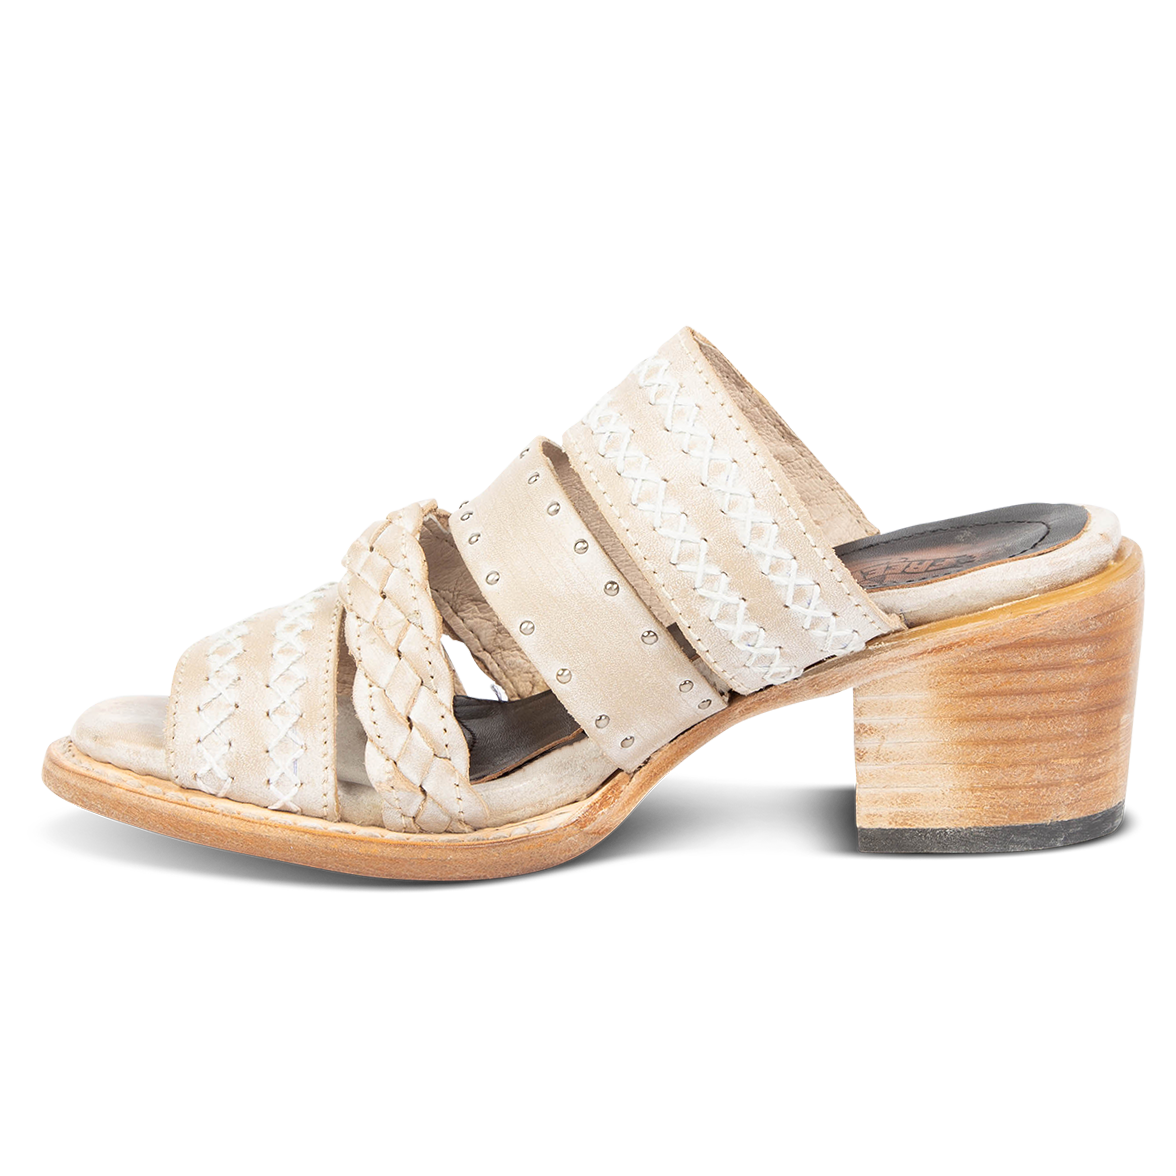 Inside view view showing braided and stitch detailed straps on FREEBIRD women's Albuquerque beige open-toe slip-on sandal